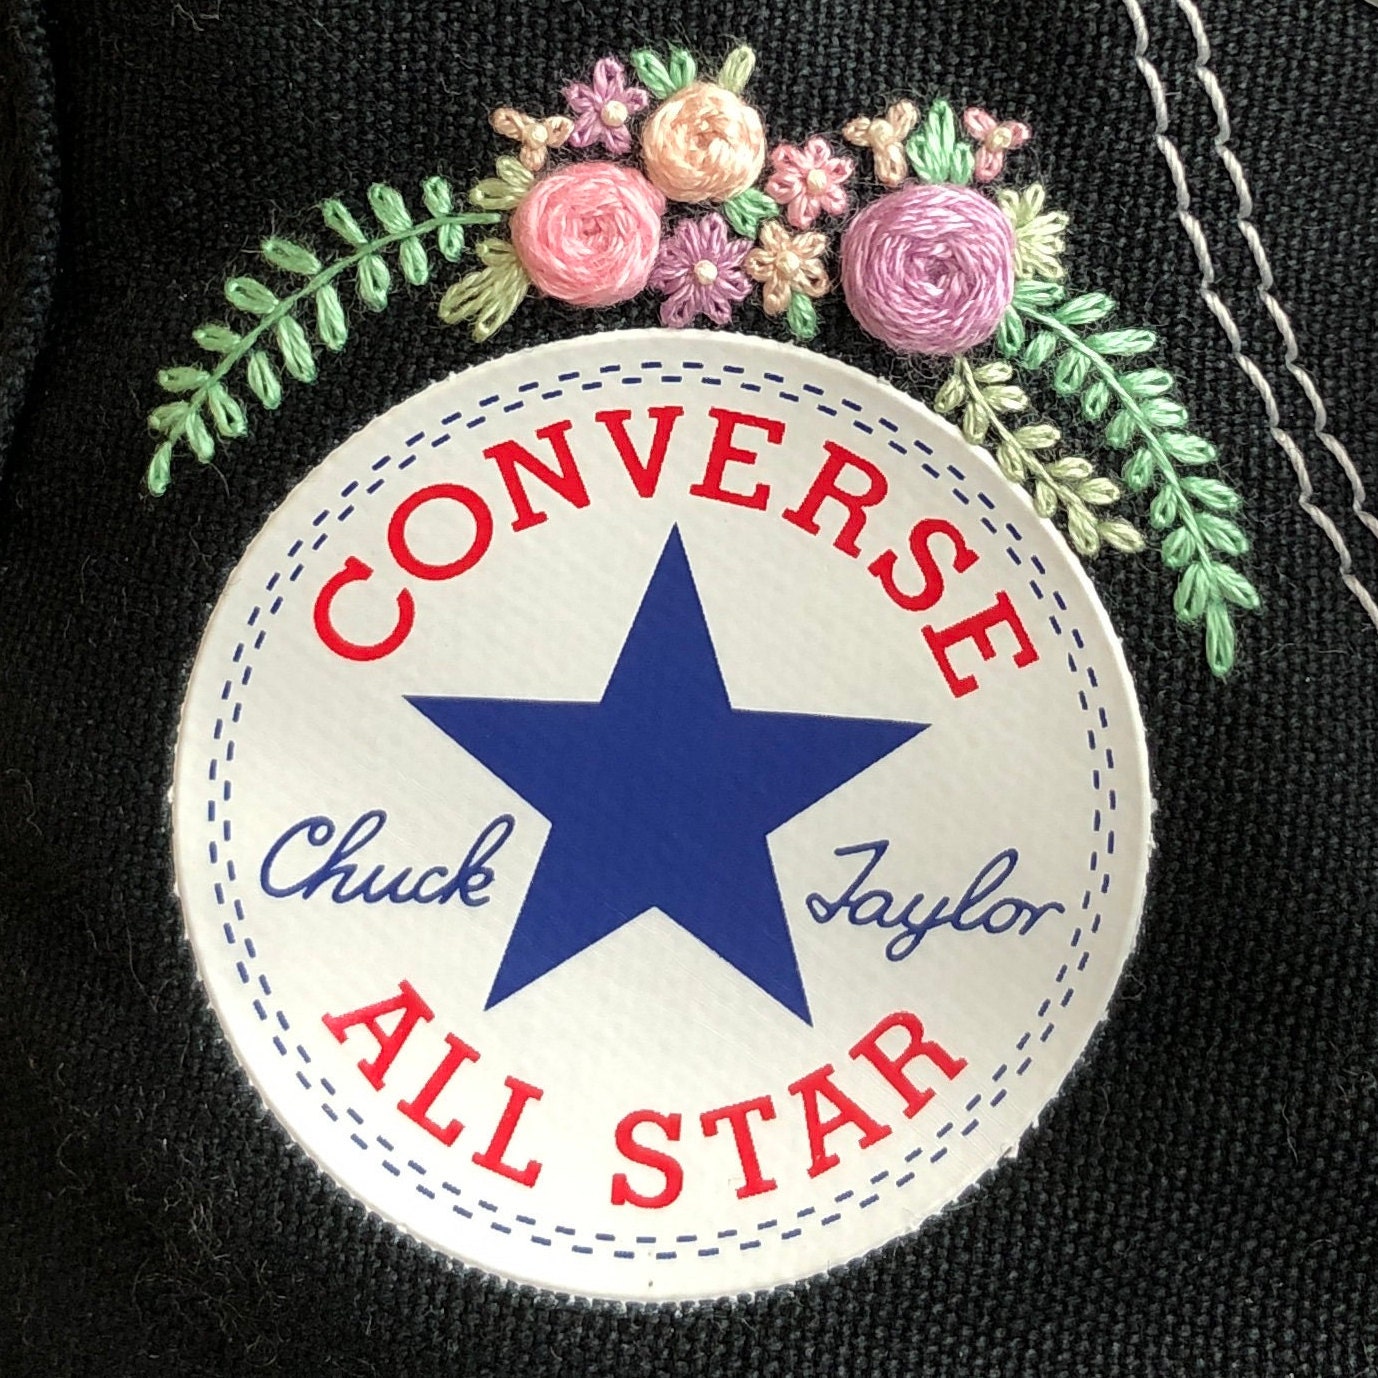 Embroidered Converse pastel Flower Crown | Etsy